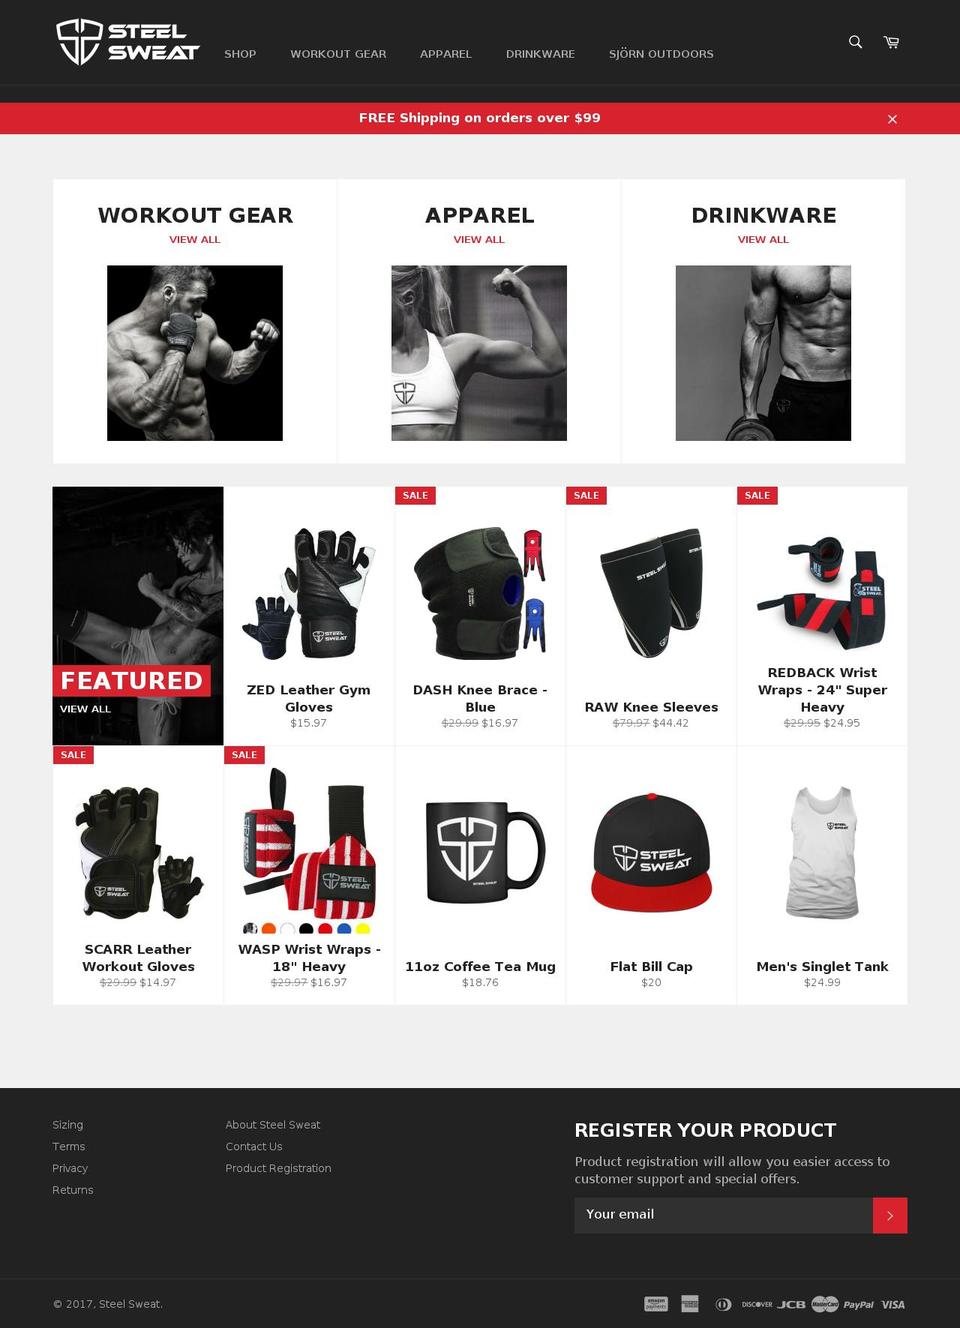 Kalles Shopify theme site example steelsweat.com